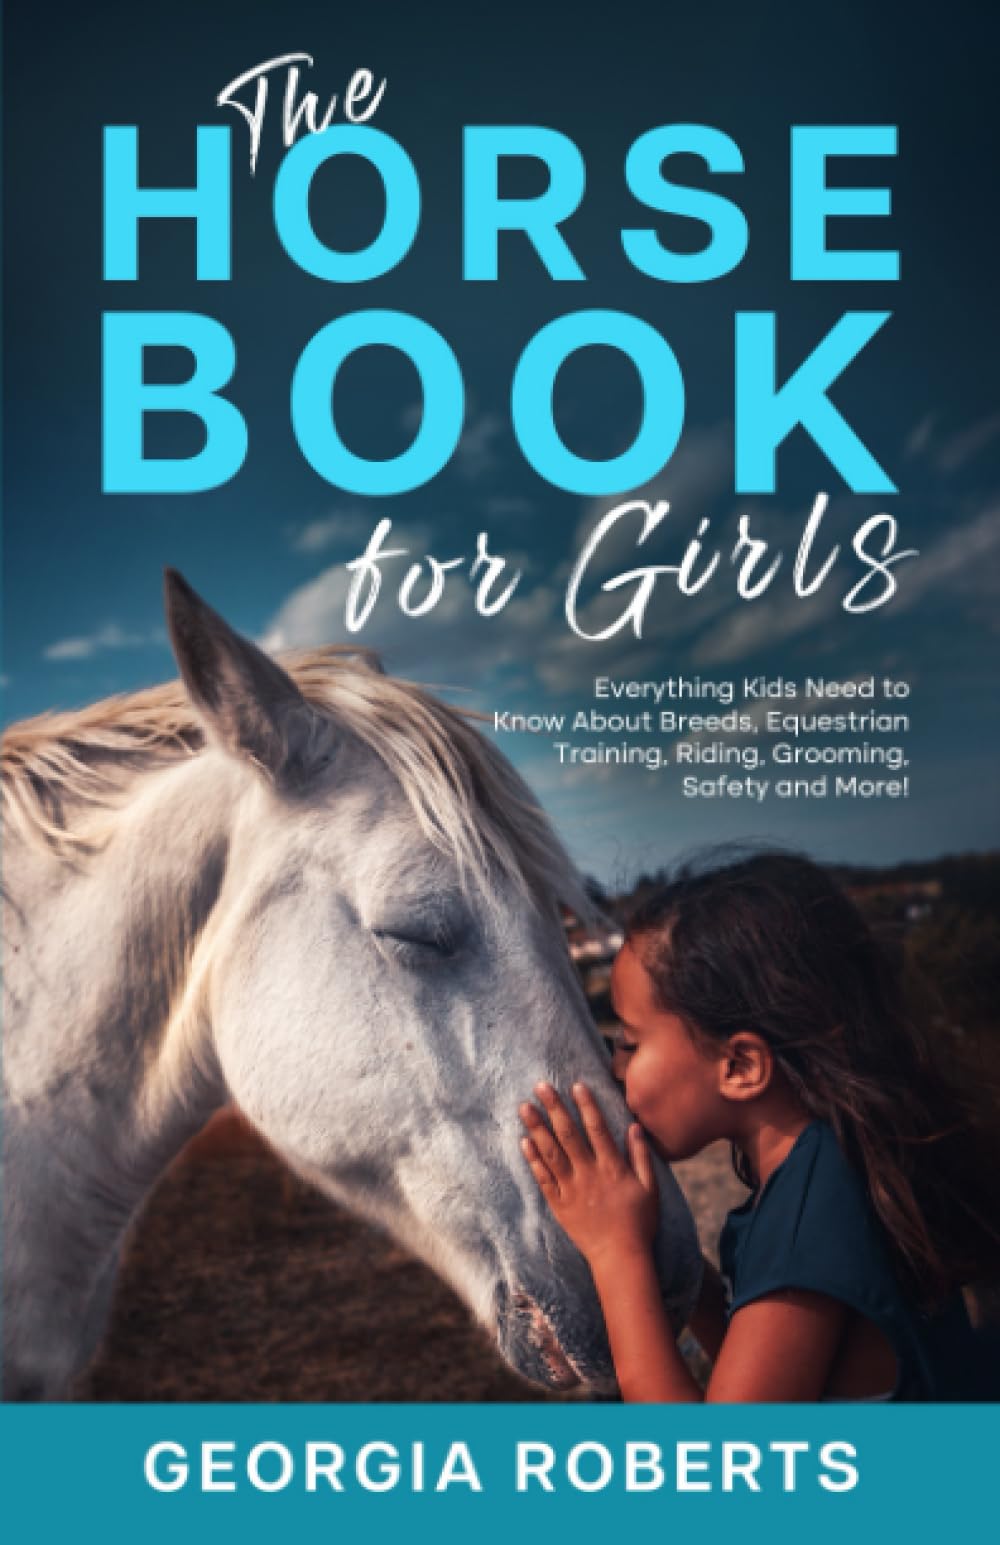 The Horse Book for Girls: Everything Kids Need to Know About Breeds, Equestrian Training, Riding, Grooming, Safety and More!